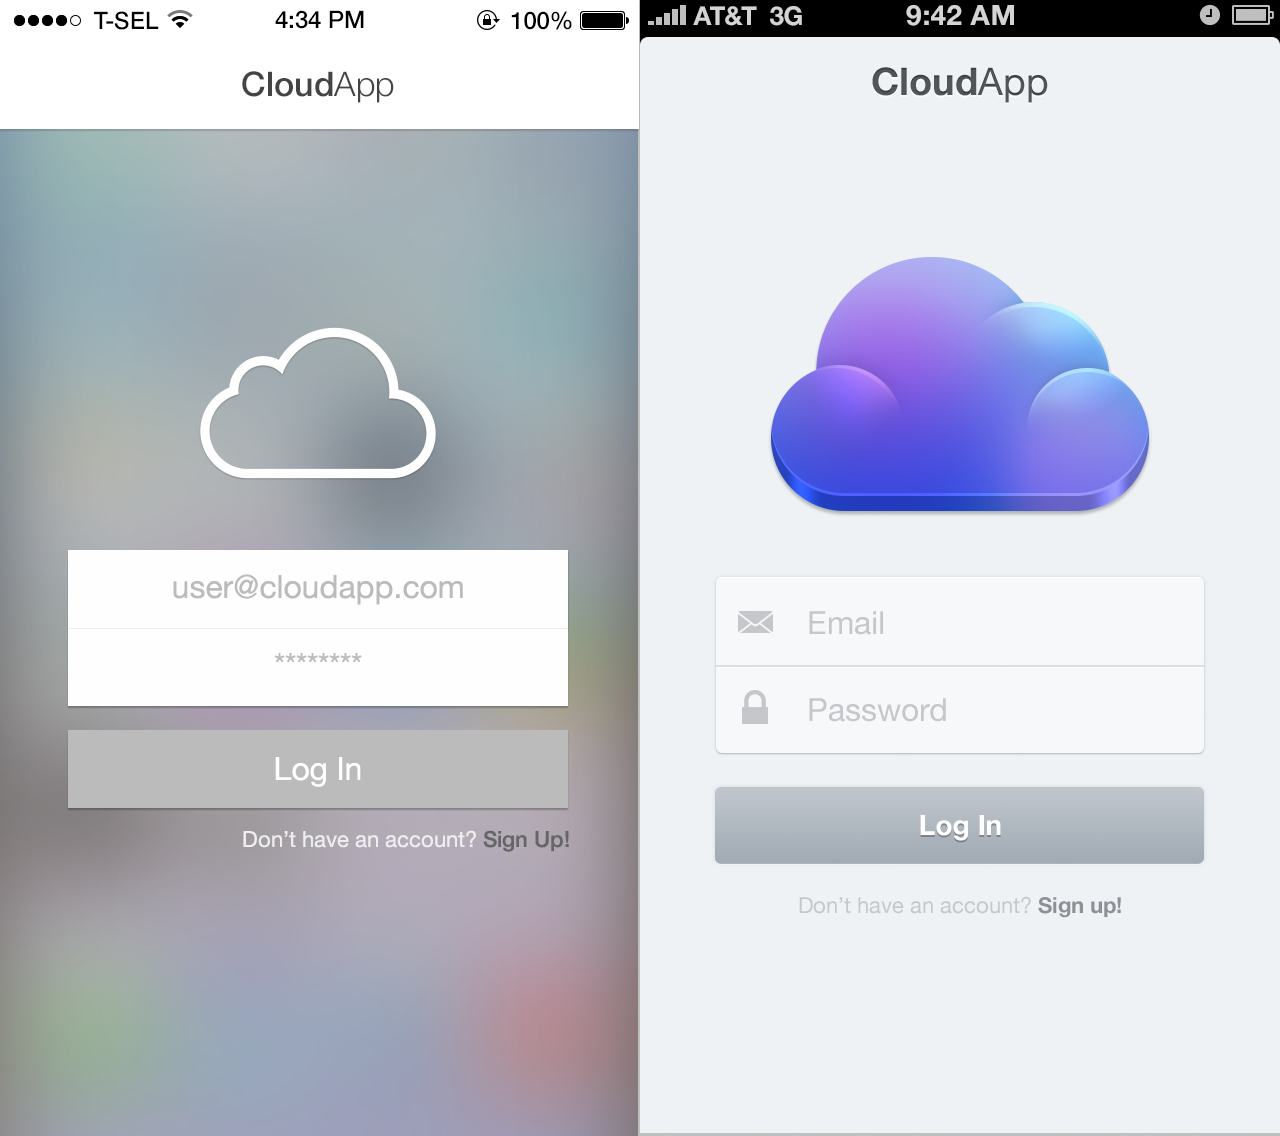 CloudApp iOS 7 Redesign
http://dribbble.com/shots/1122534-Maybe?list=searches&amp;tag=ios_7